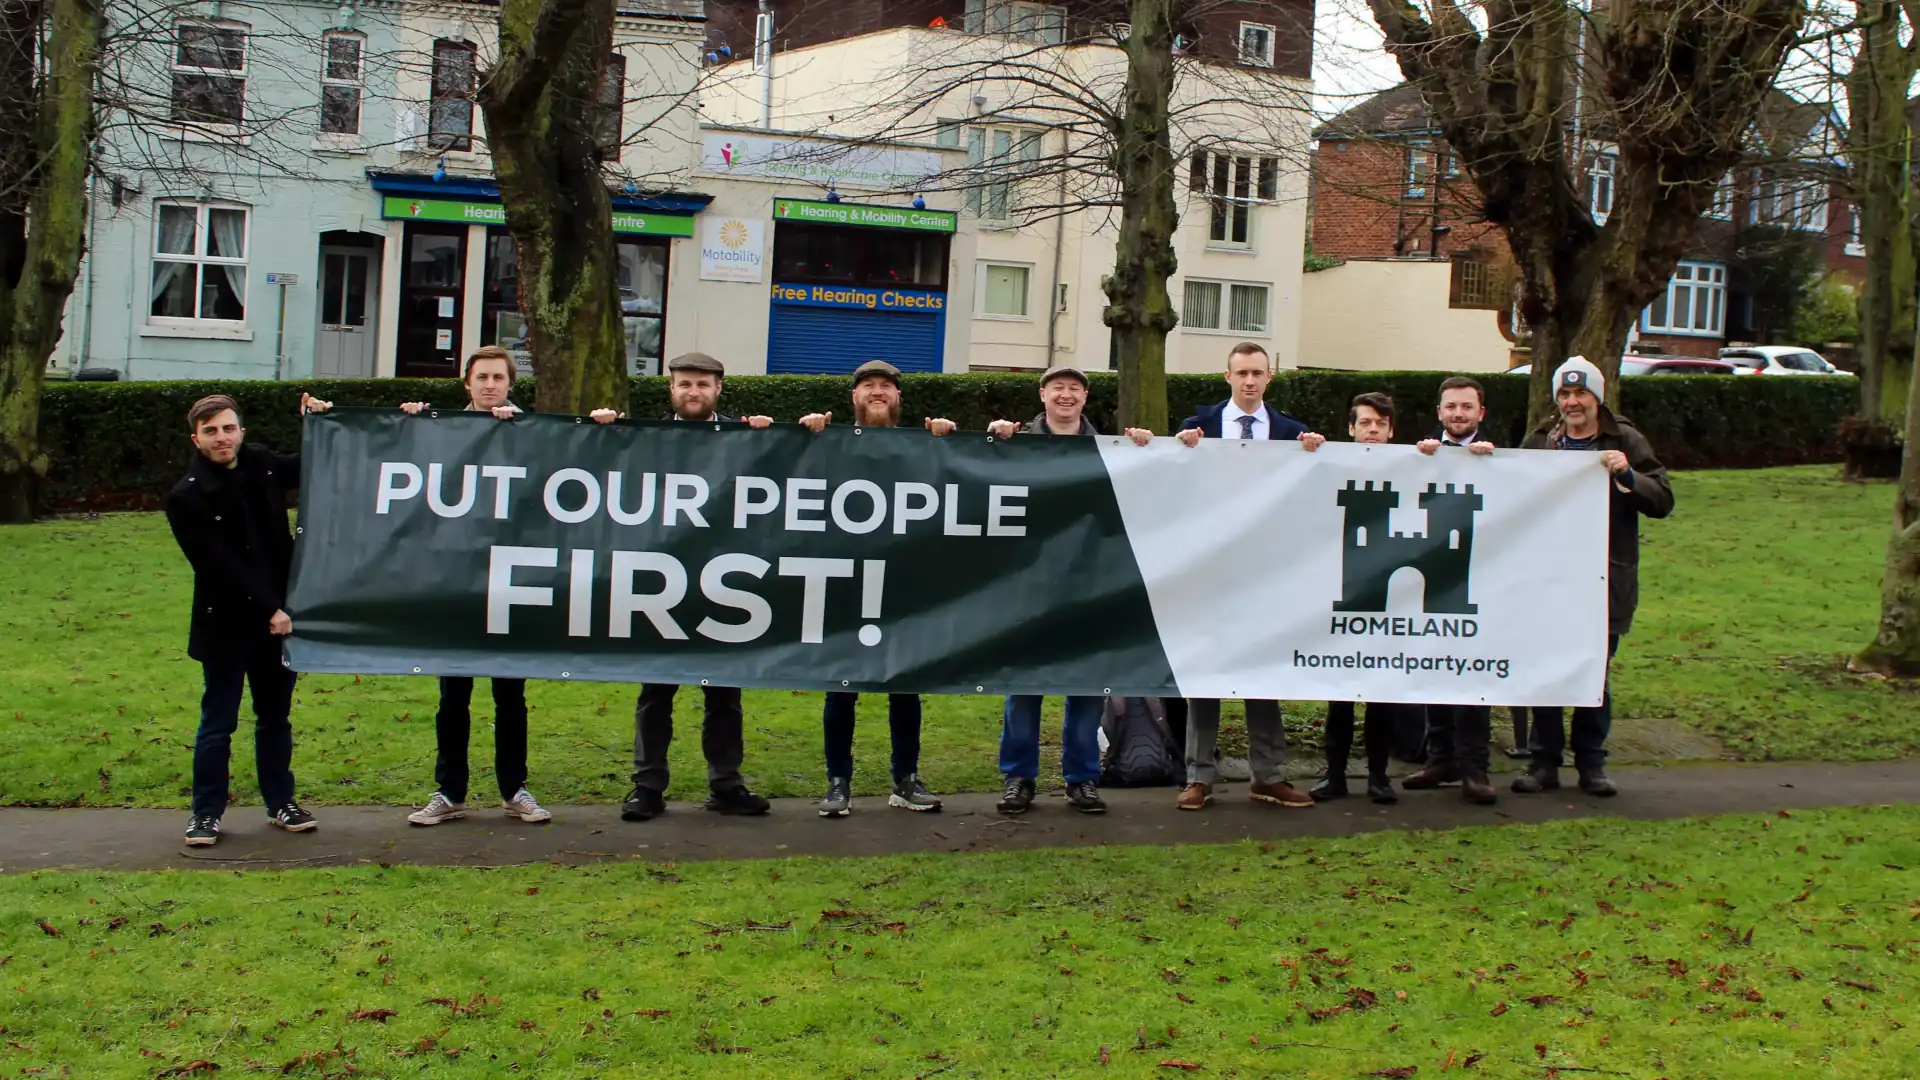 Homeland Party activists with 'Put Our People First!' banner